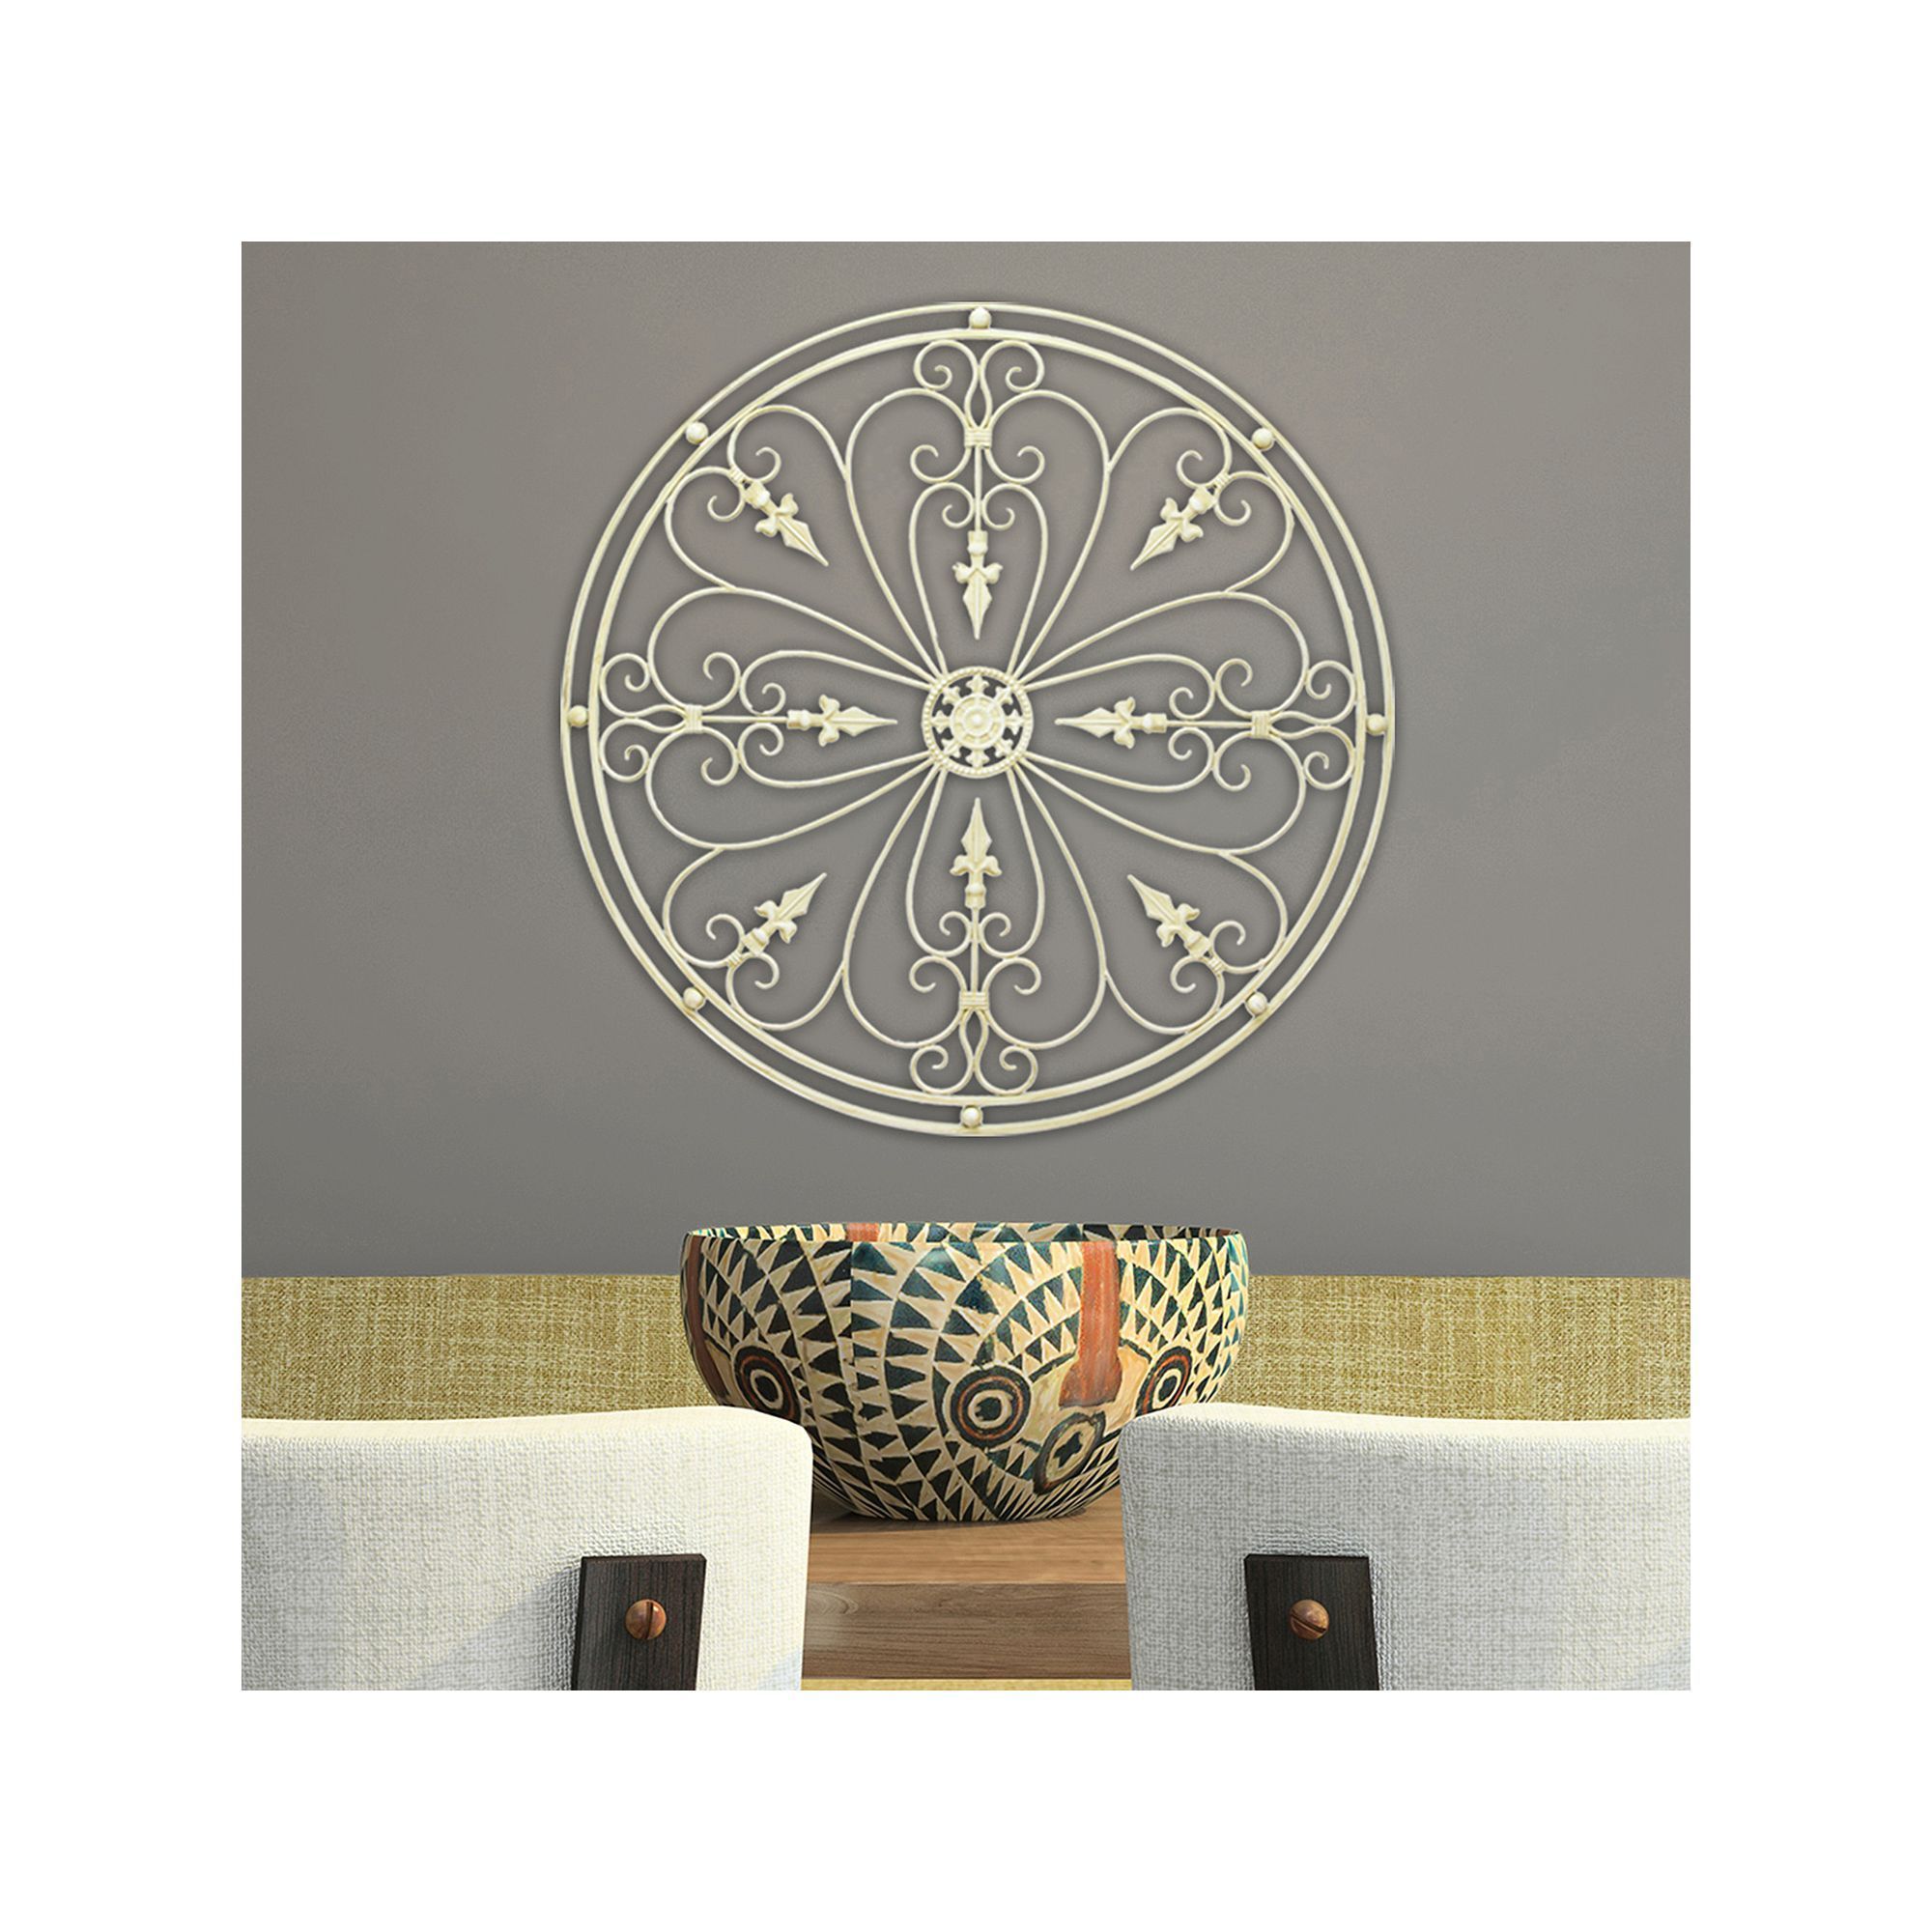 Stratton Home Decor Antique Medallion Metal Wall Decor In Shabby Medallion Wall Decor (View 7 of 30)